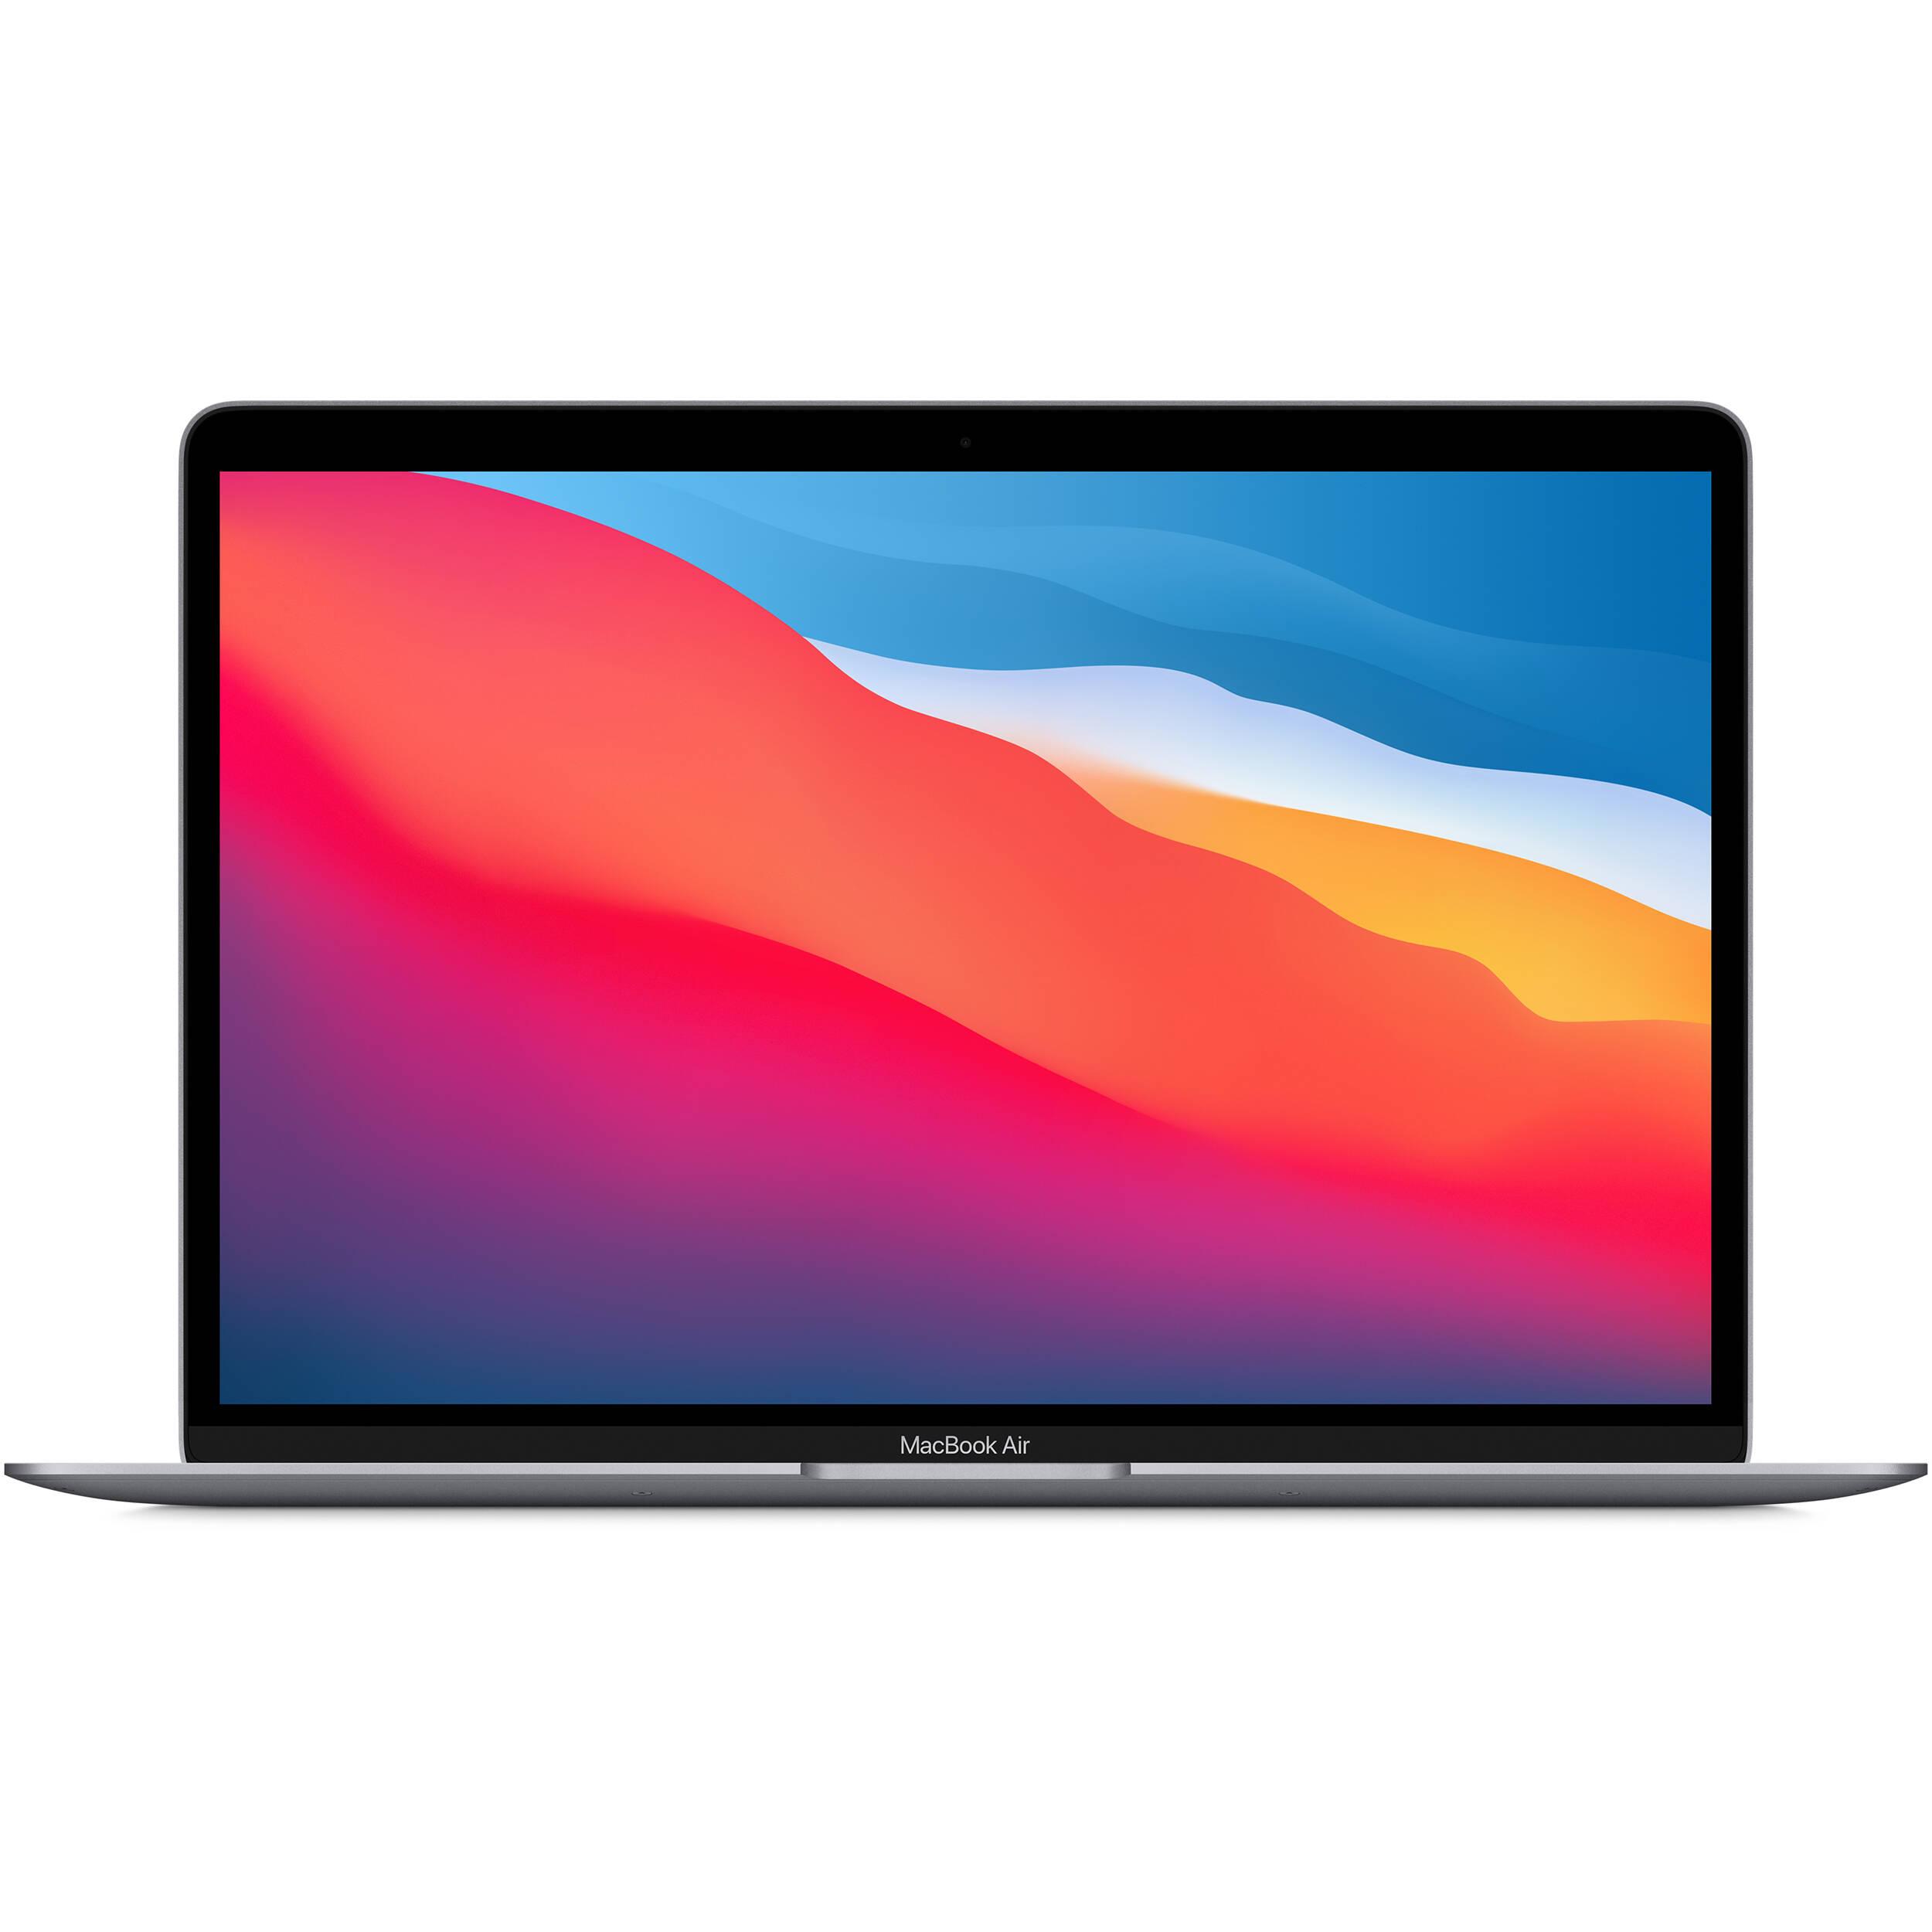 Apple MacBook Air M1 13.3in Laptop for $707.99 Shipped